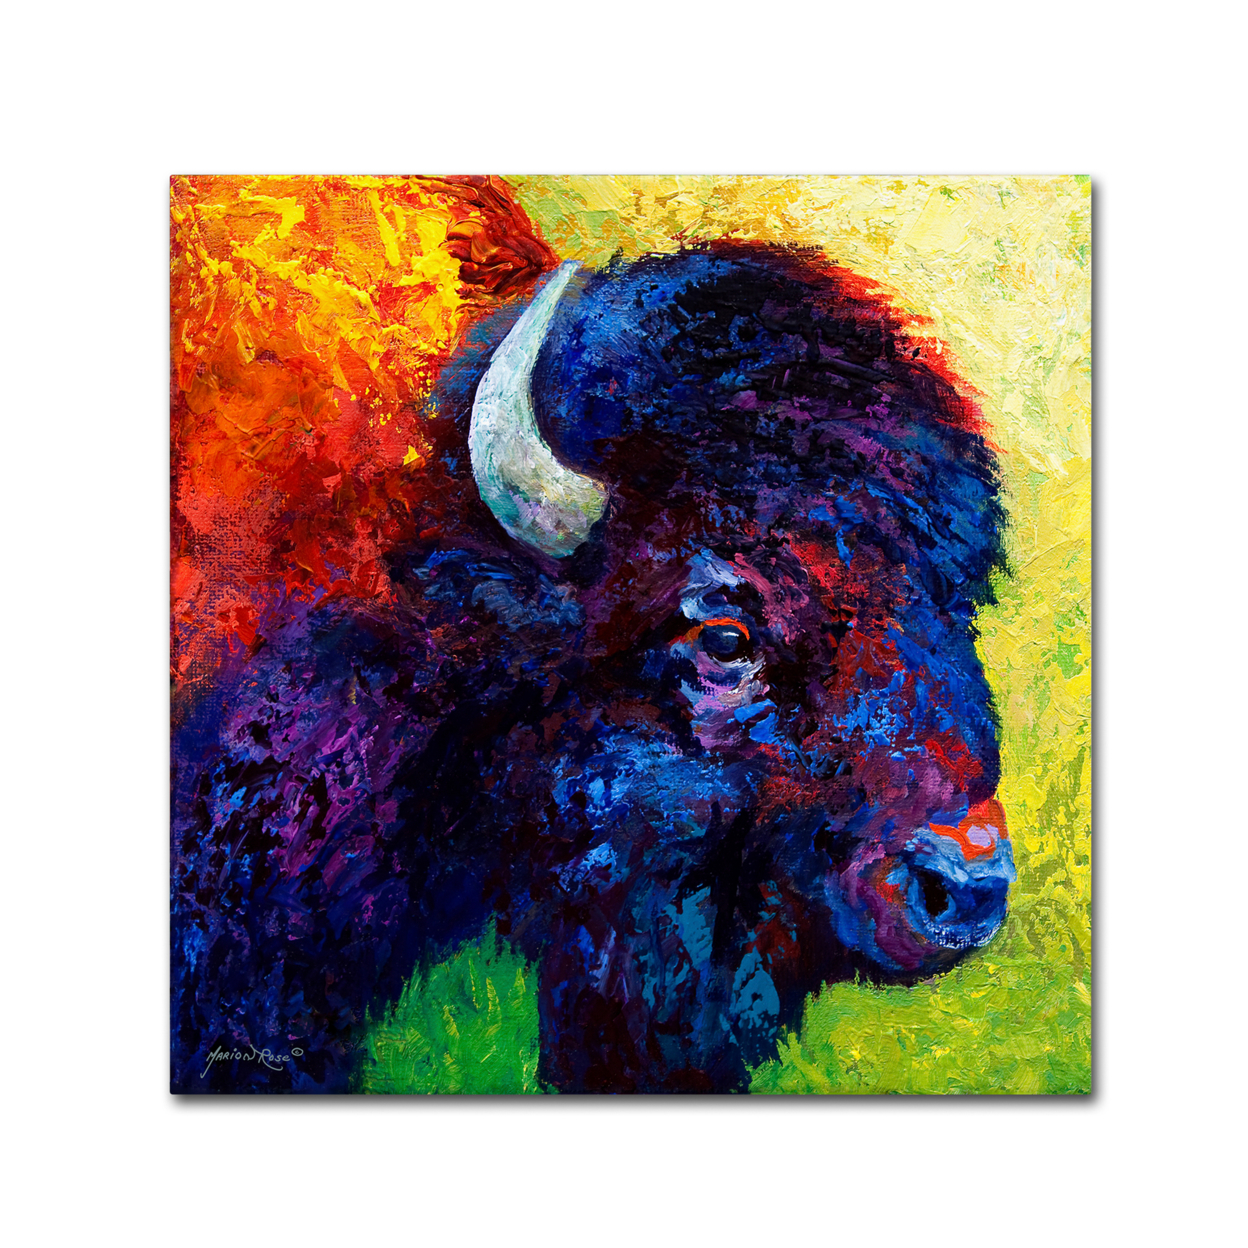 Marion Rose 'Bison Head III' Ready To Hang Canvas Art 35 X 35 Inches Made In USA